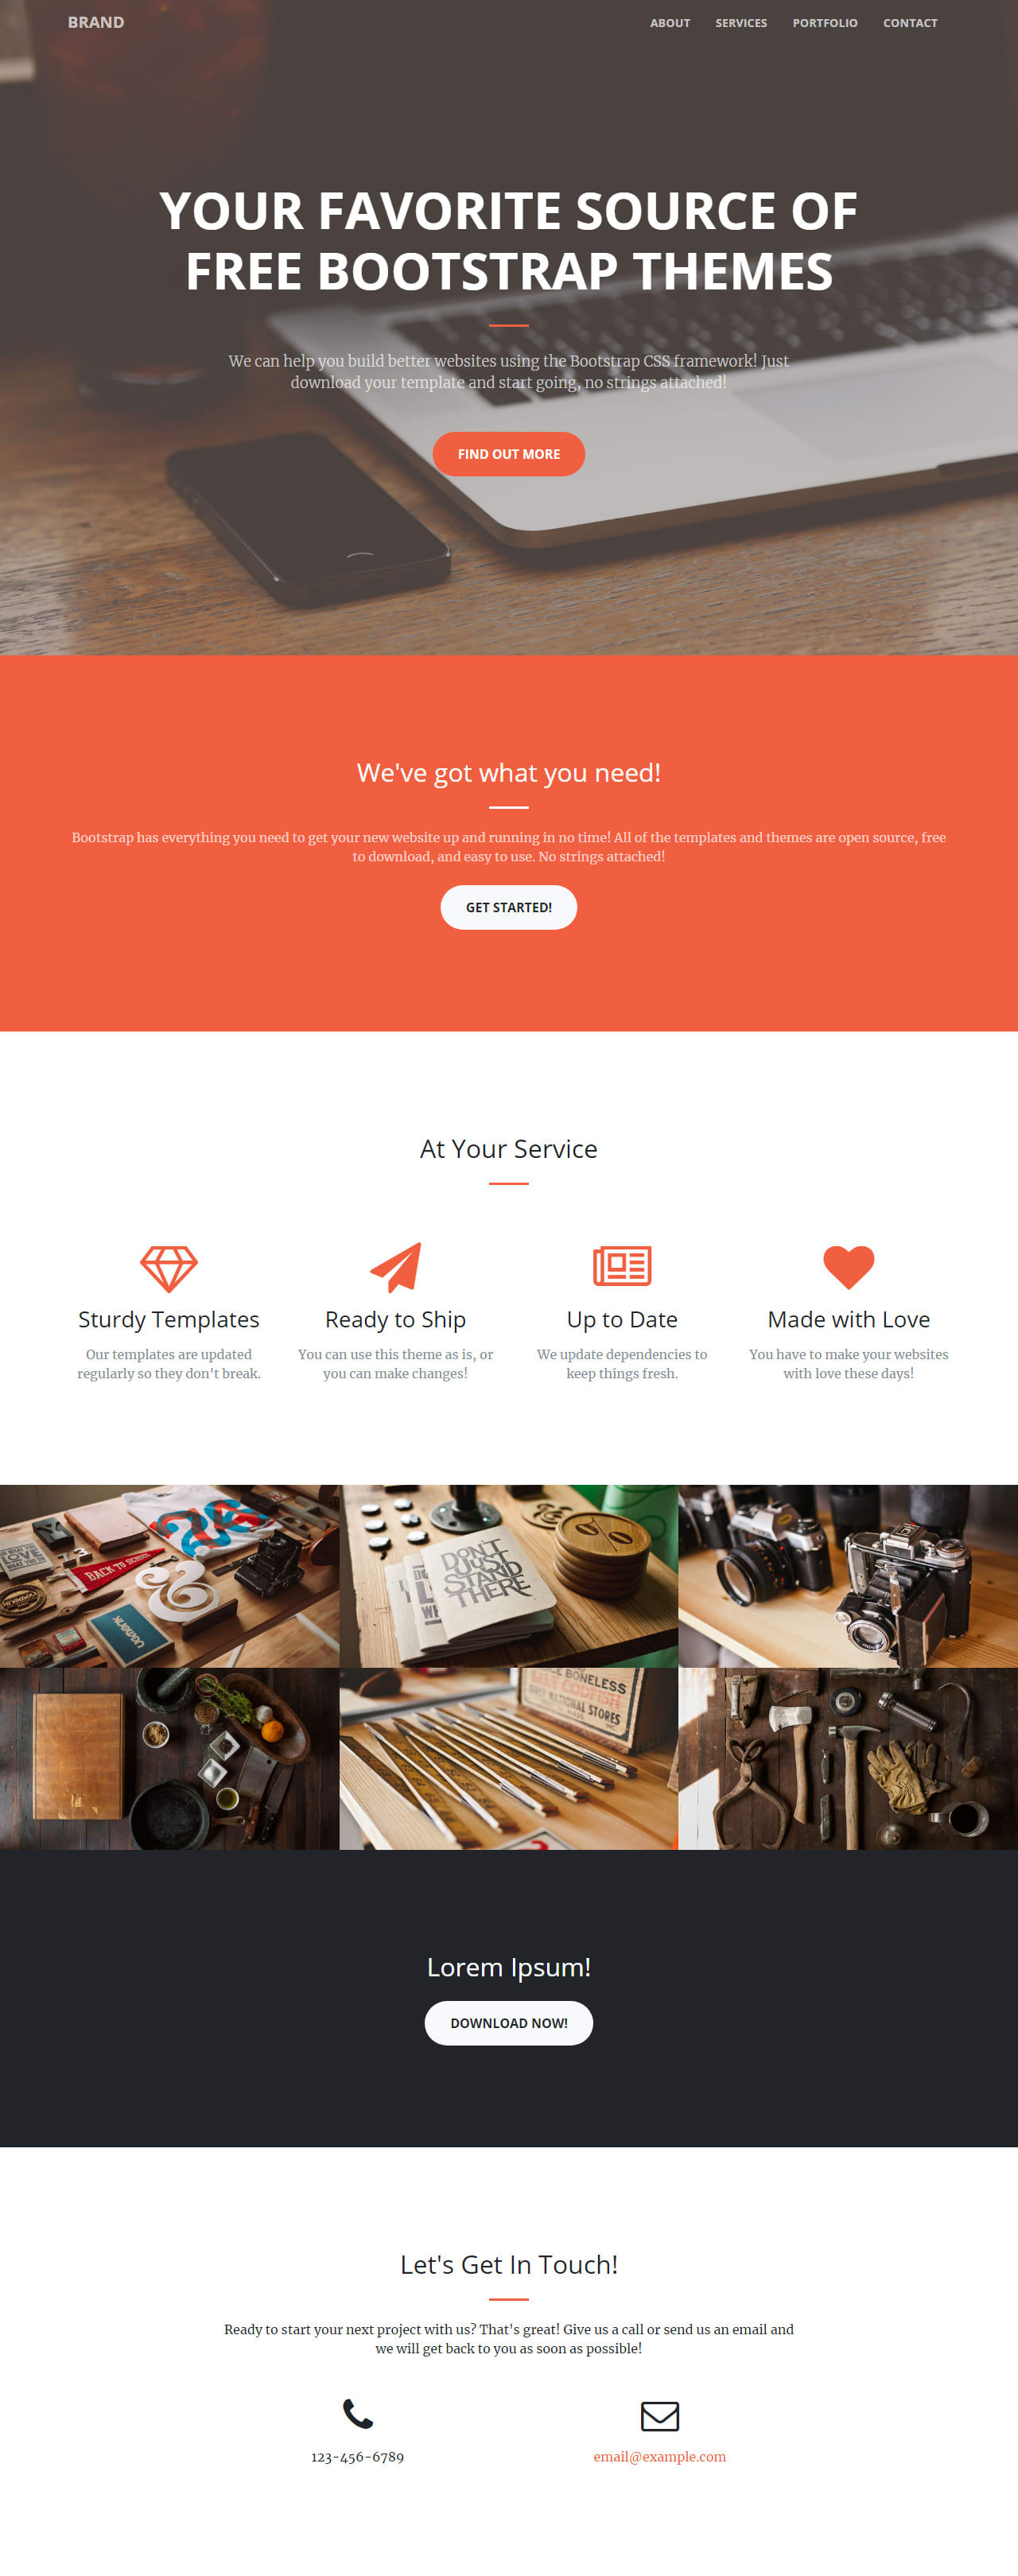 Design responsive bootstrap landing page